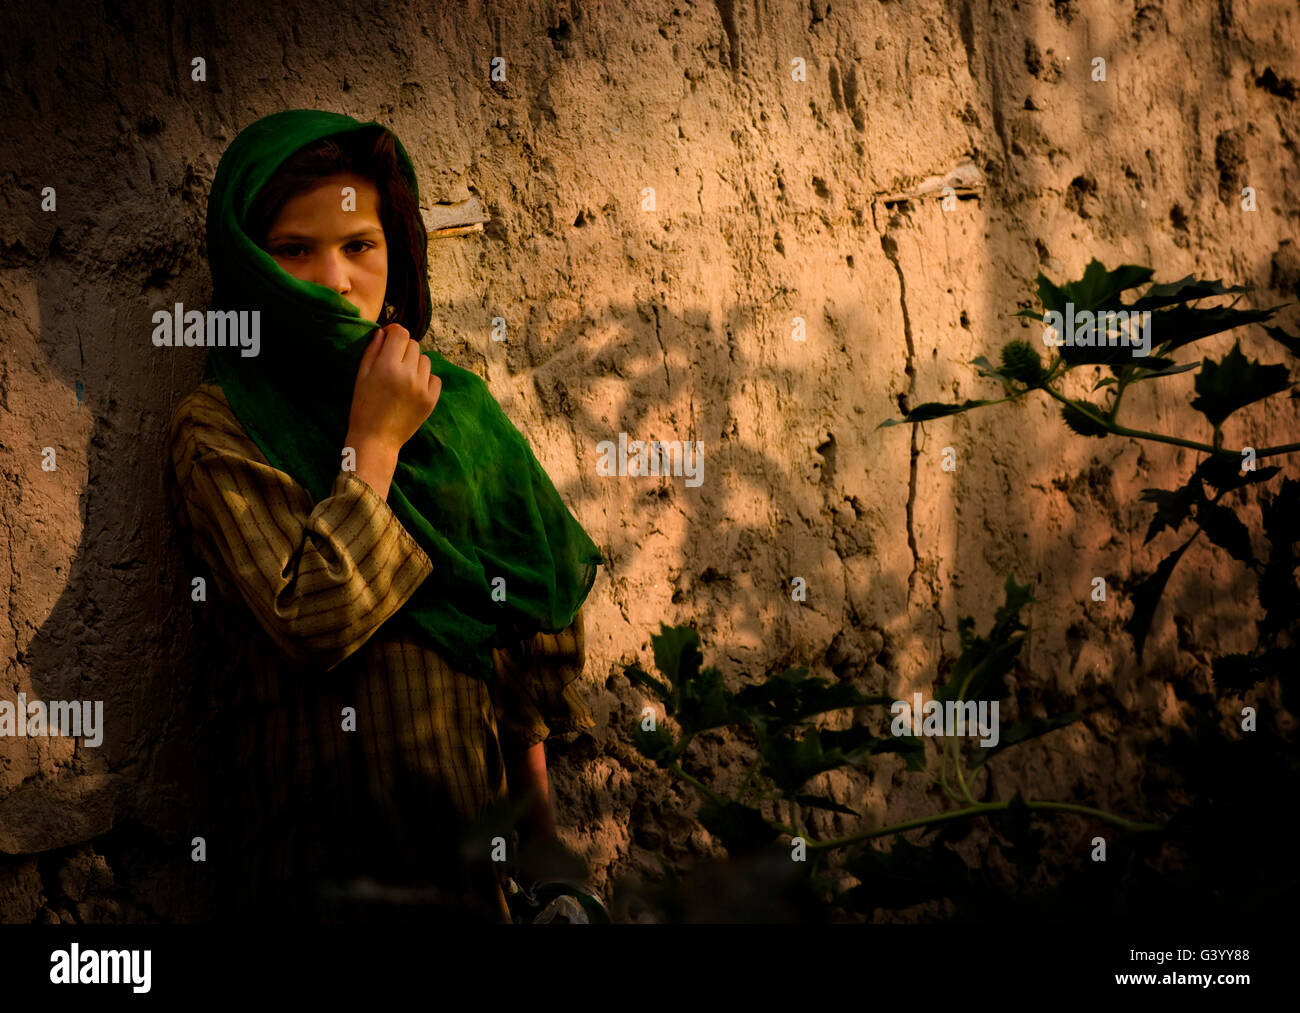 An Afghan girl covers her face from the dusty wind in a village. Stock Photo